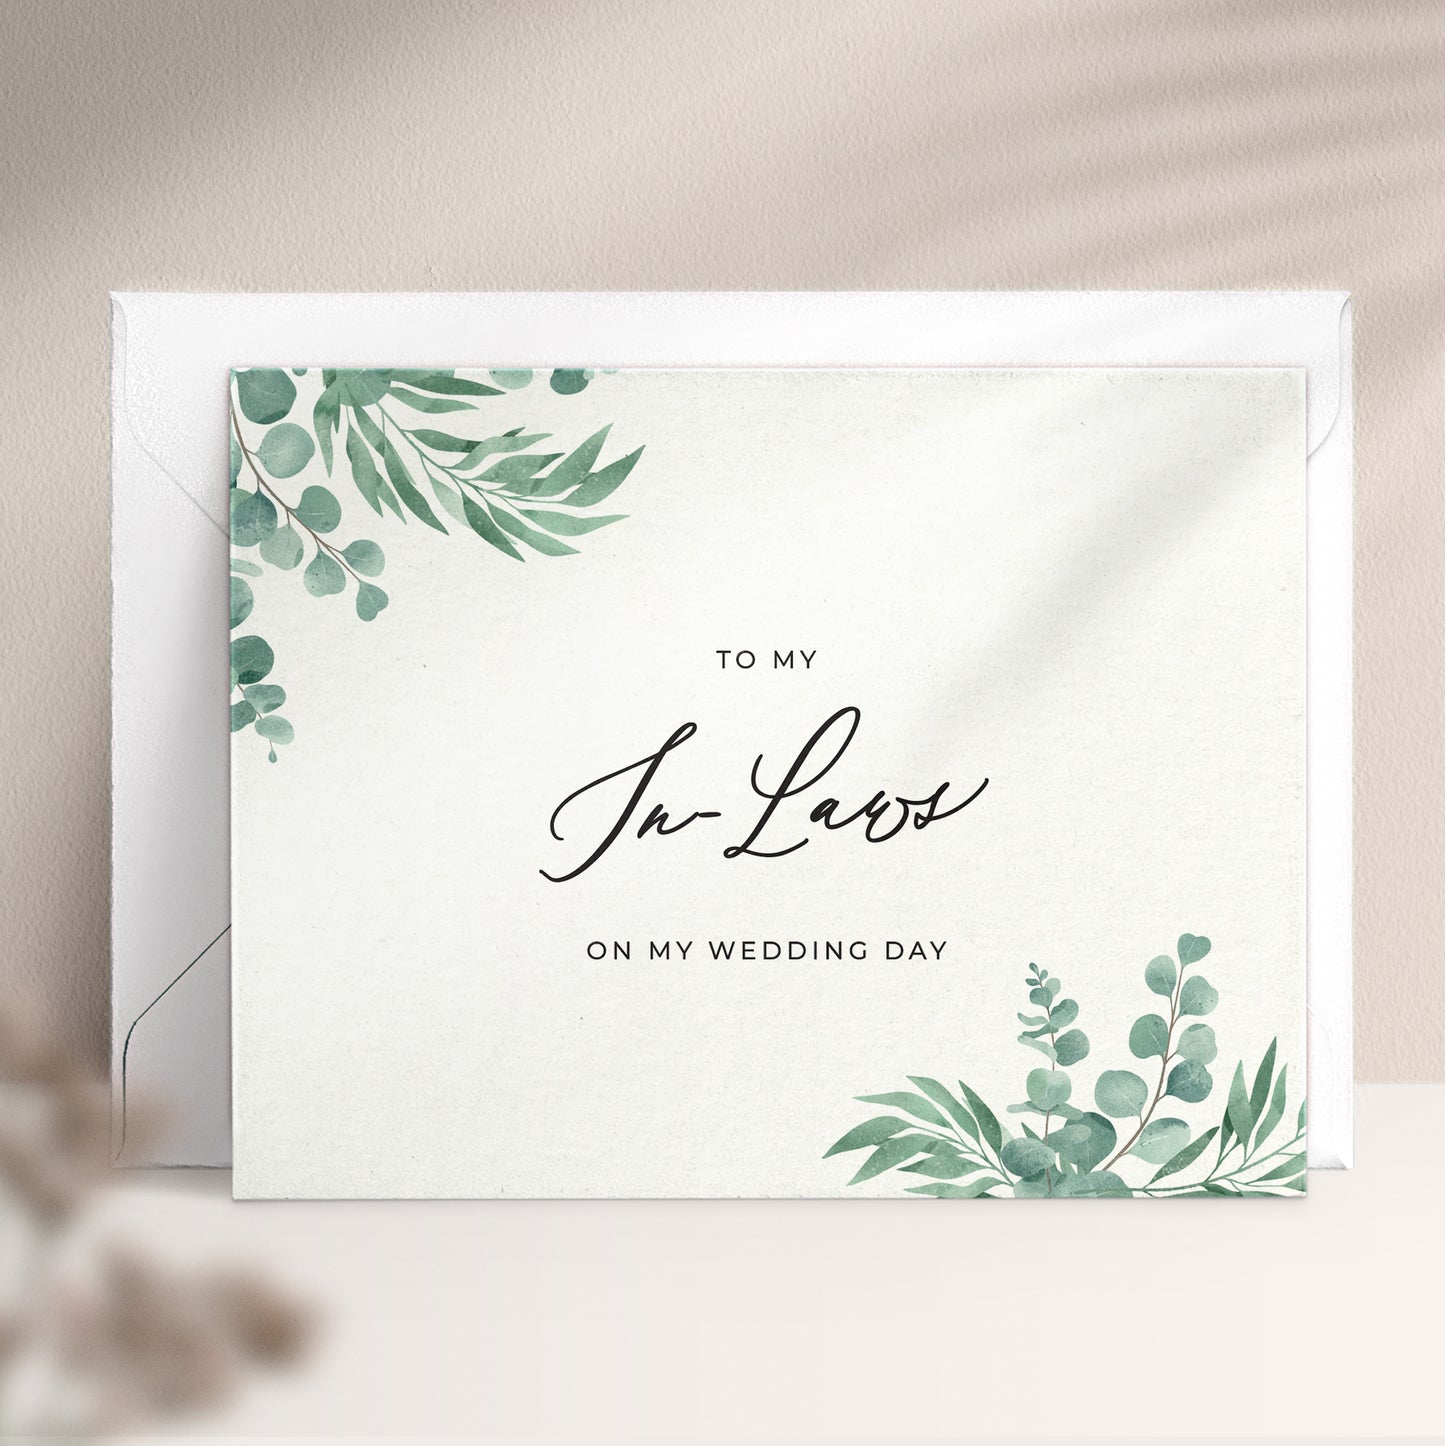 To my in-laws on my wedding day note card in greenery design with eucalyptus leaves and calligraphy font from XOXOKristen.